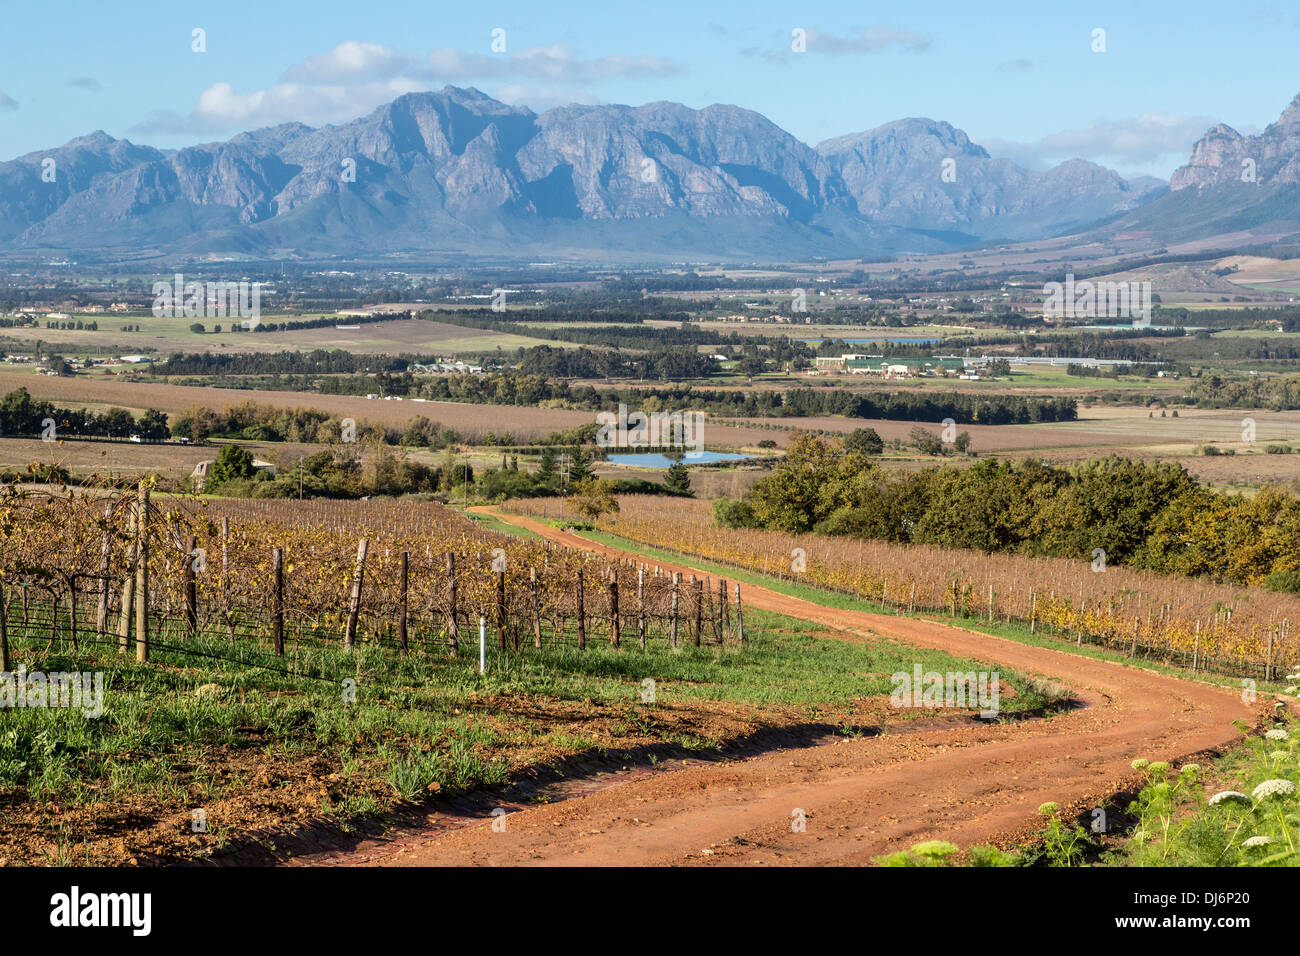 South Africa, Paarl area, near Cape Town. Scenic Landscape. Vineyard in winter on the left. Stock Photo